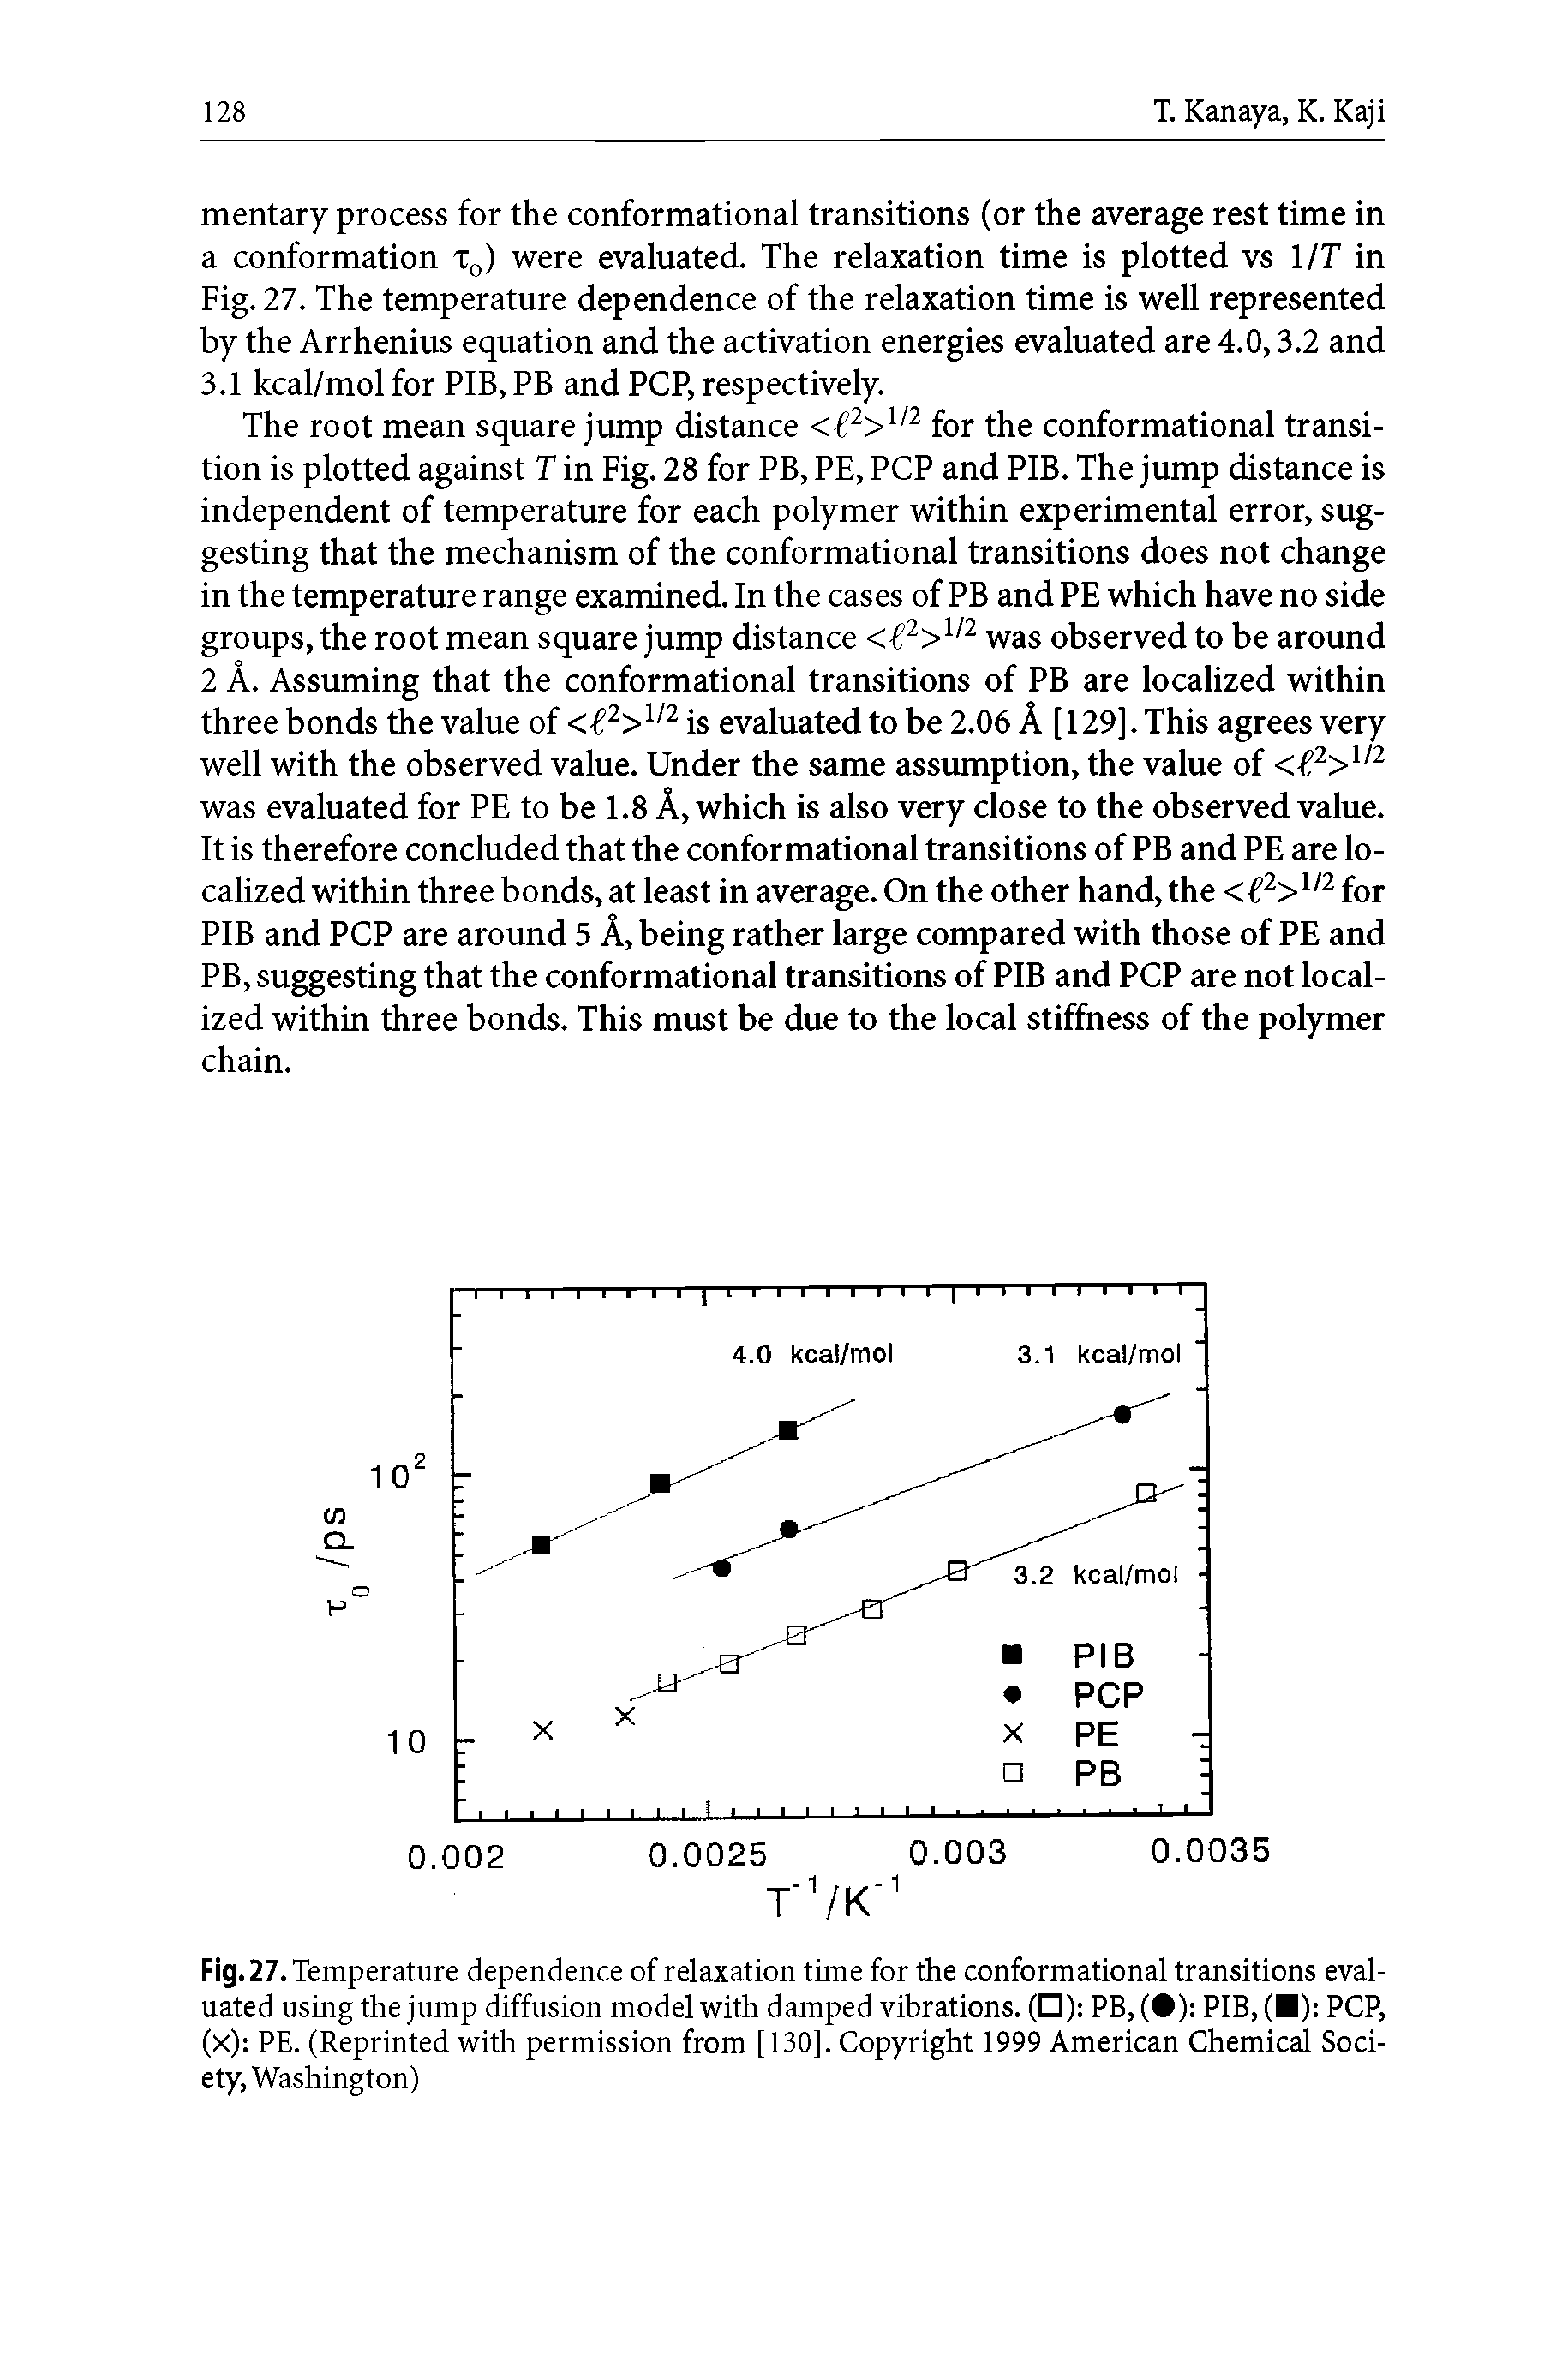 Fig. 27. Temperature dependence of relaxation time for the conformational transitions evaluated using the jump diffusion model with damped vibrations. ( ) PB, ( ) PIB, ( ) PCP, (x) PE. (Reprinted with permission from [ 130]. Copyright 1999 American Chemical Society, Washington)...